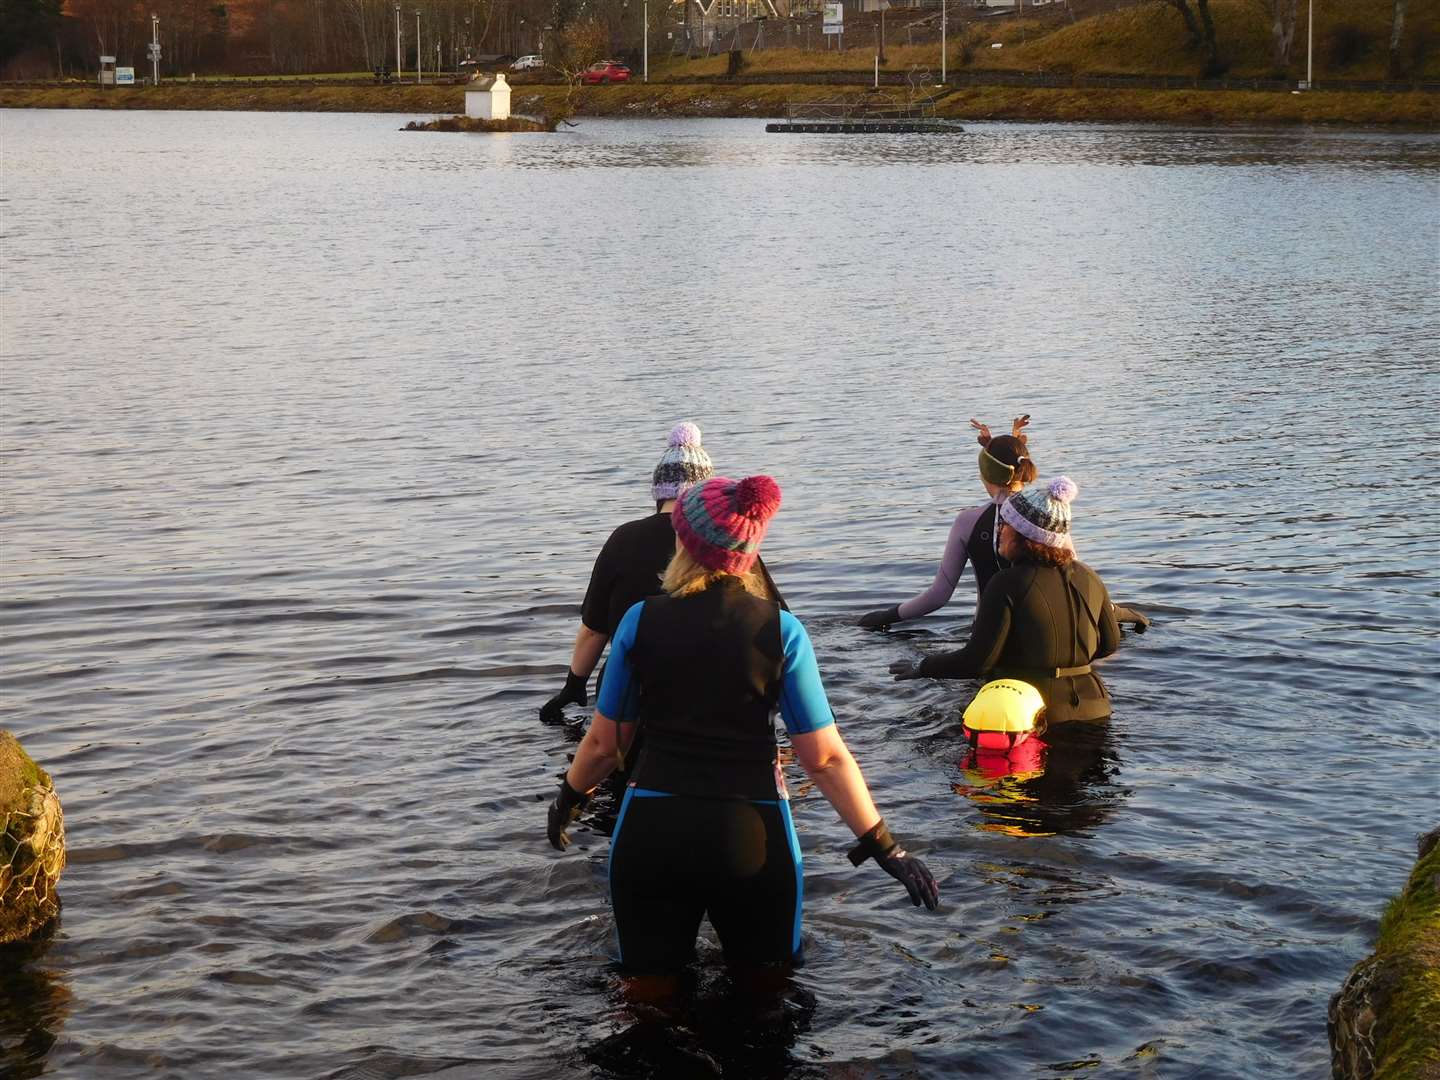 Loch Shin Swimmers also braved the cold waters of Loch Shin last December to raise cash for a cancer charity.